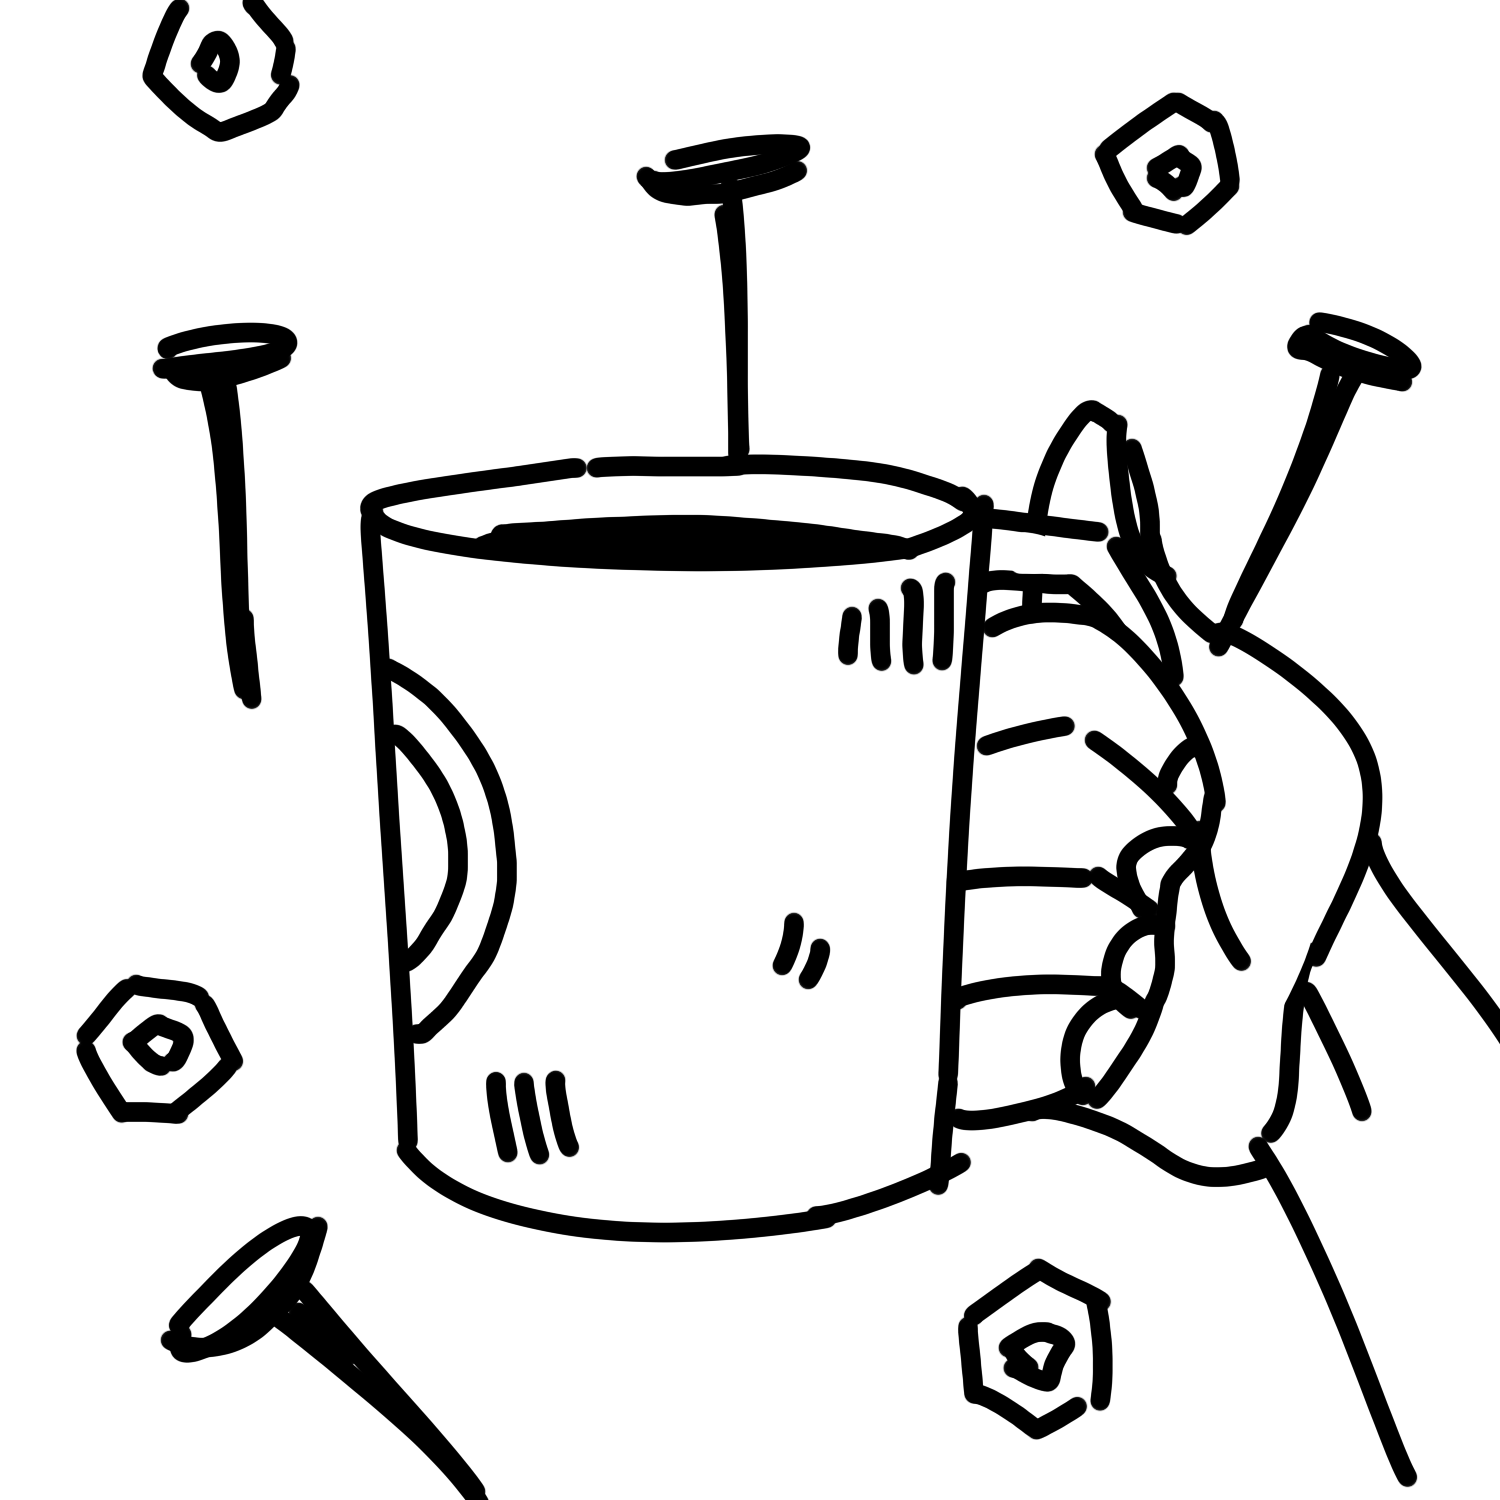 In a black and white outline style. A hand holds a mug filled with coffee. Surrounding it are floating screws and nails.